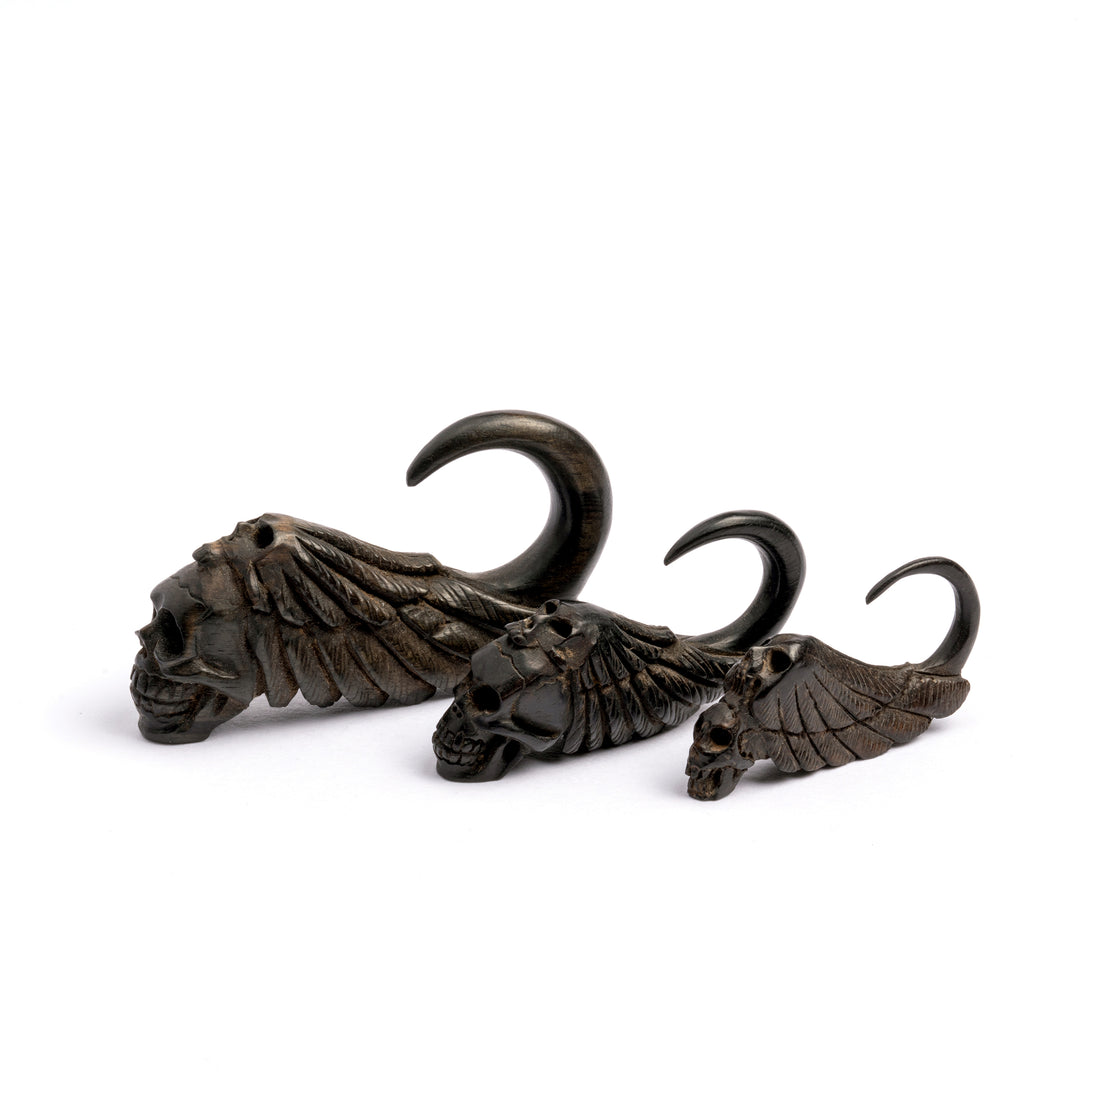 12g, 6g, 2g black wood winged skull ear hangers right side and front view